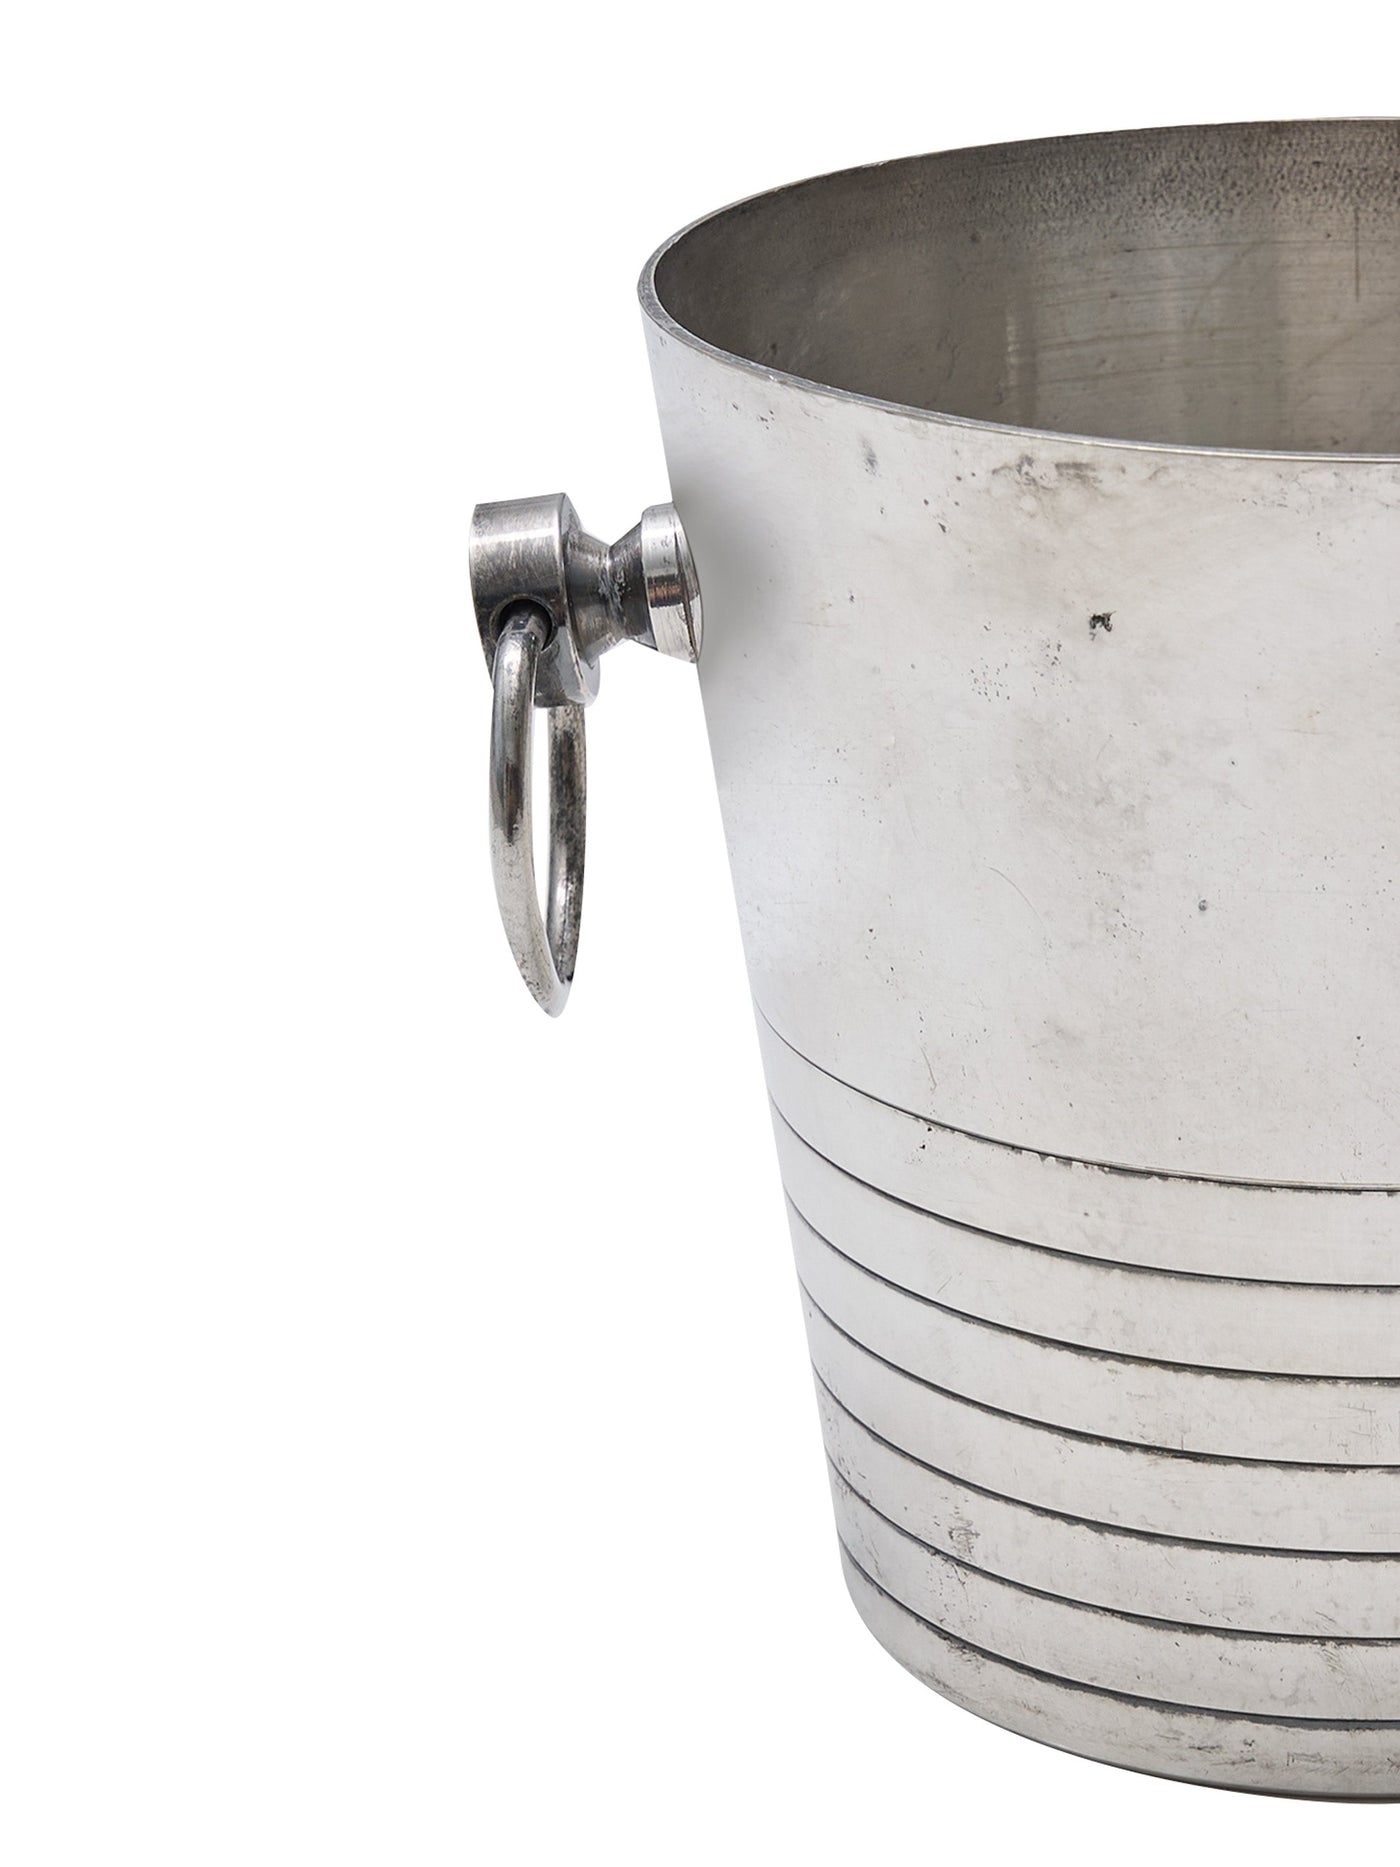 Vintage Silver Ice Bucket with handles.